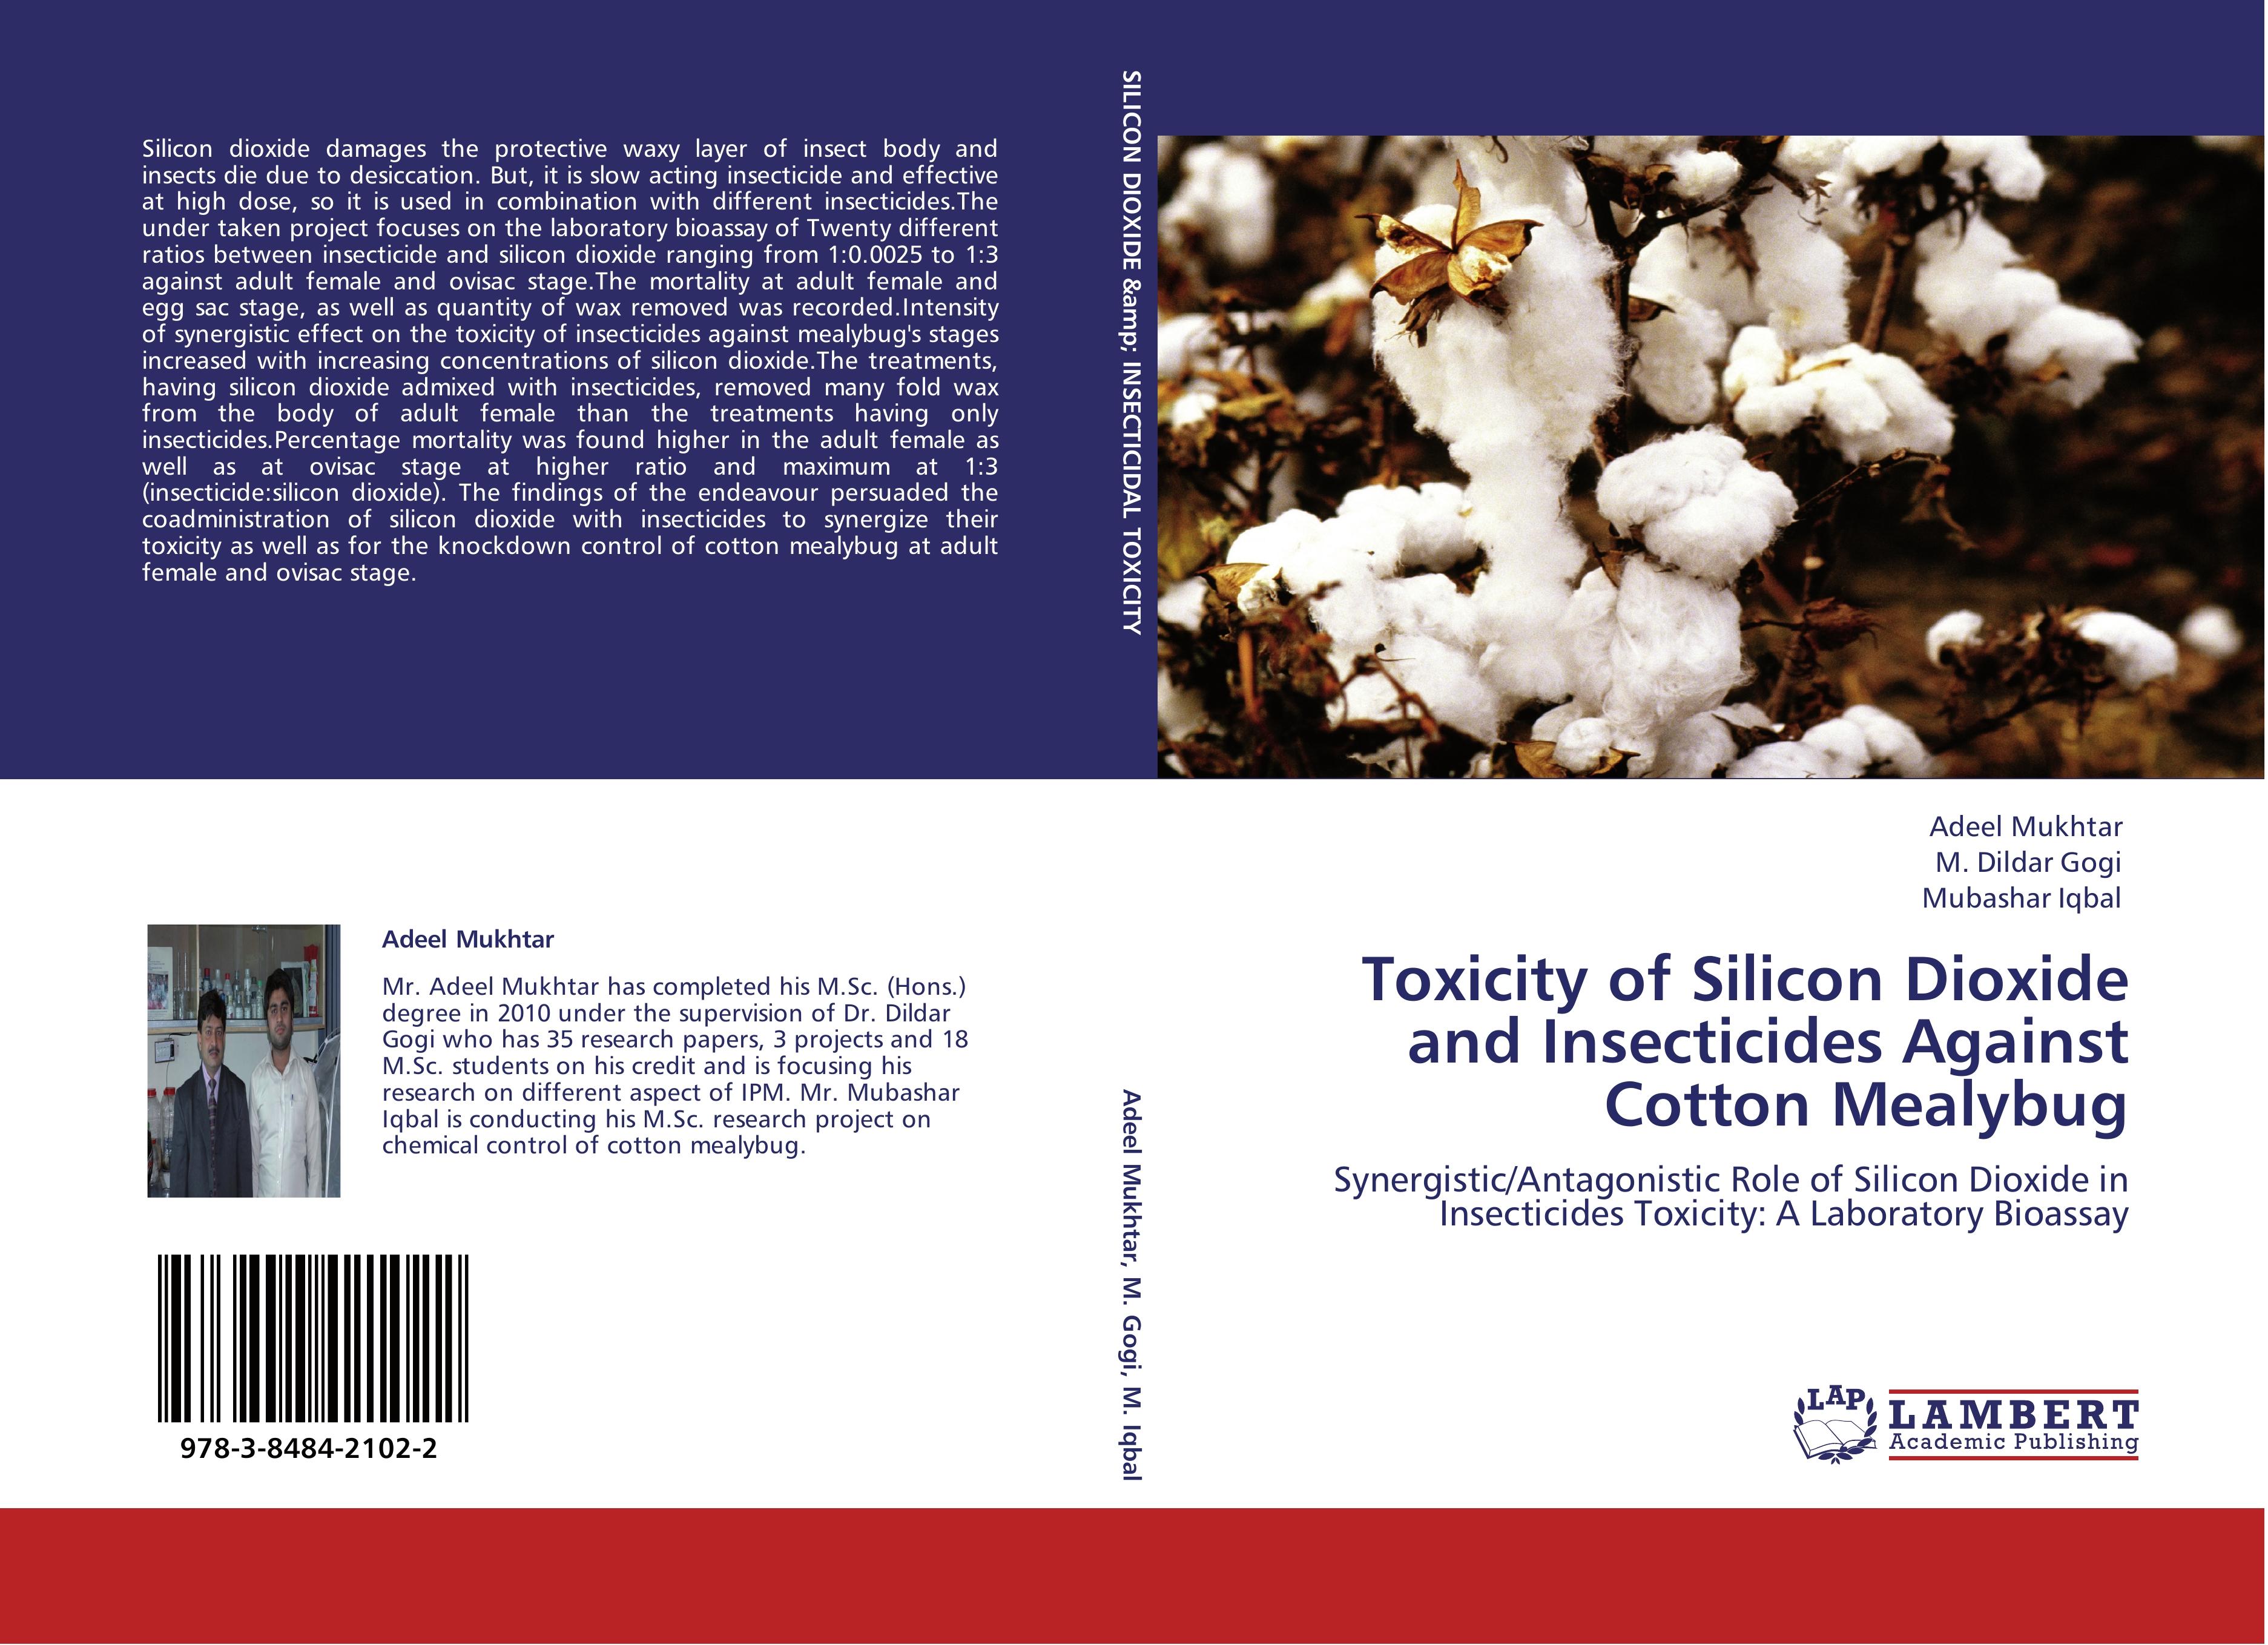 Toxicity of Silicon Dioxide and Insecticides Against Cotton Mealybug / Synergistic/Antagonistic Role of Silicon Dioxide in Insecticides Toxicity: A Laboratory Bioassay / Adeel Mukhtar (u. a.) / Buch - Mukhtar, Adeel